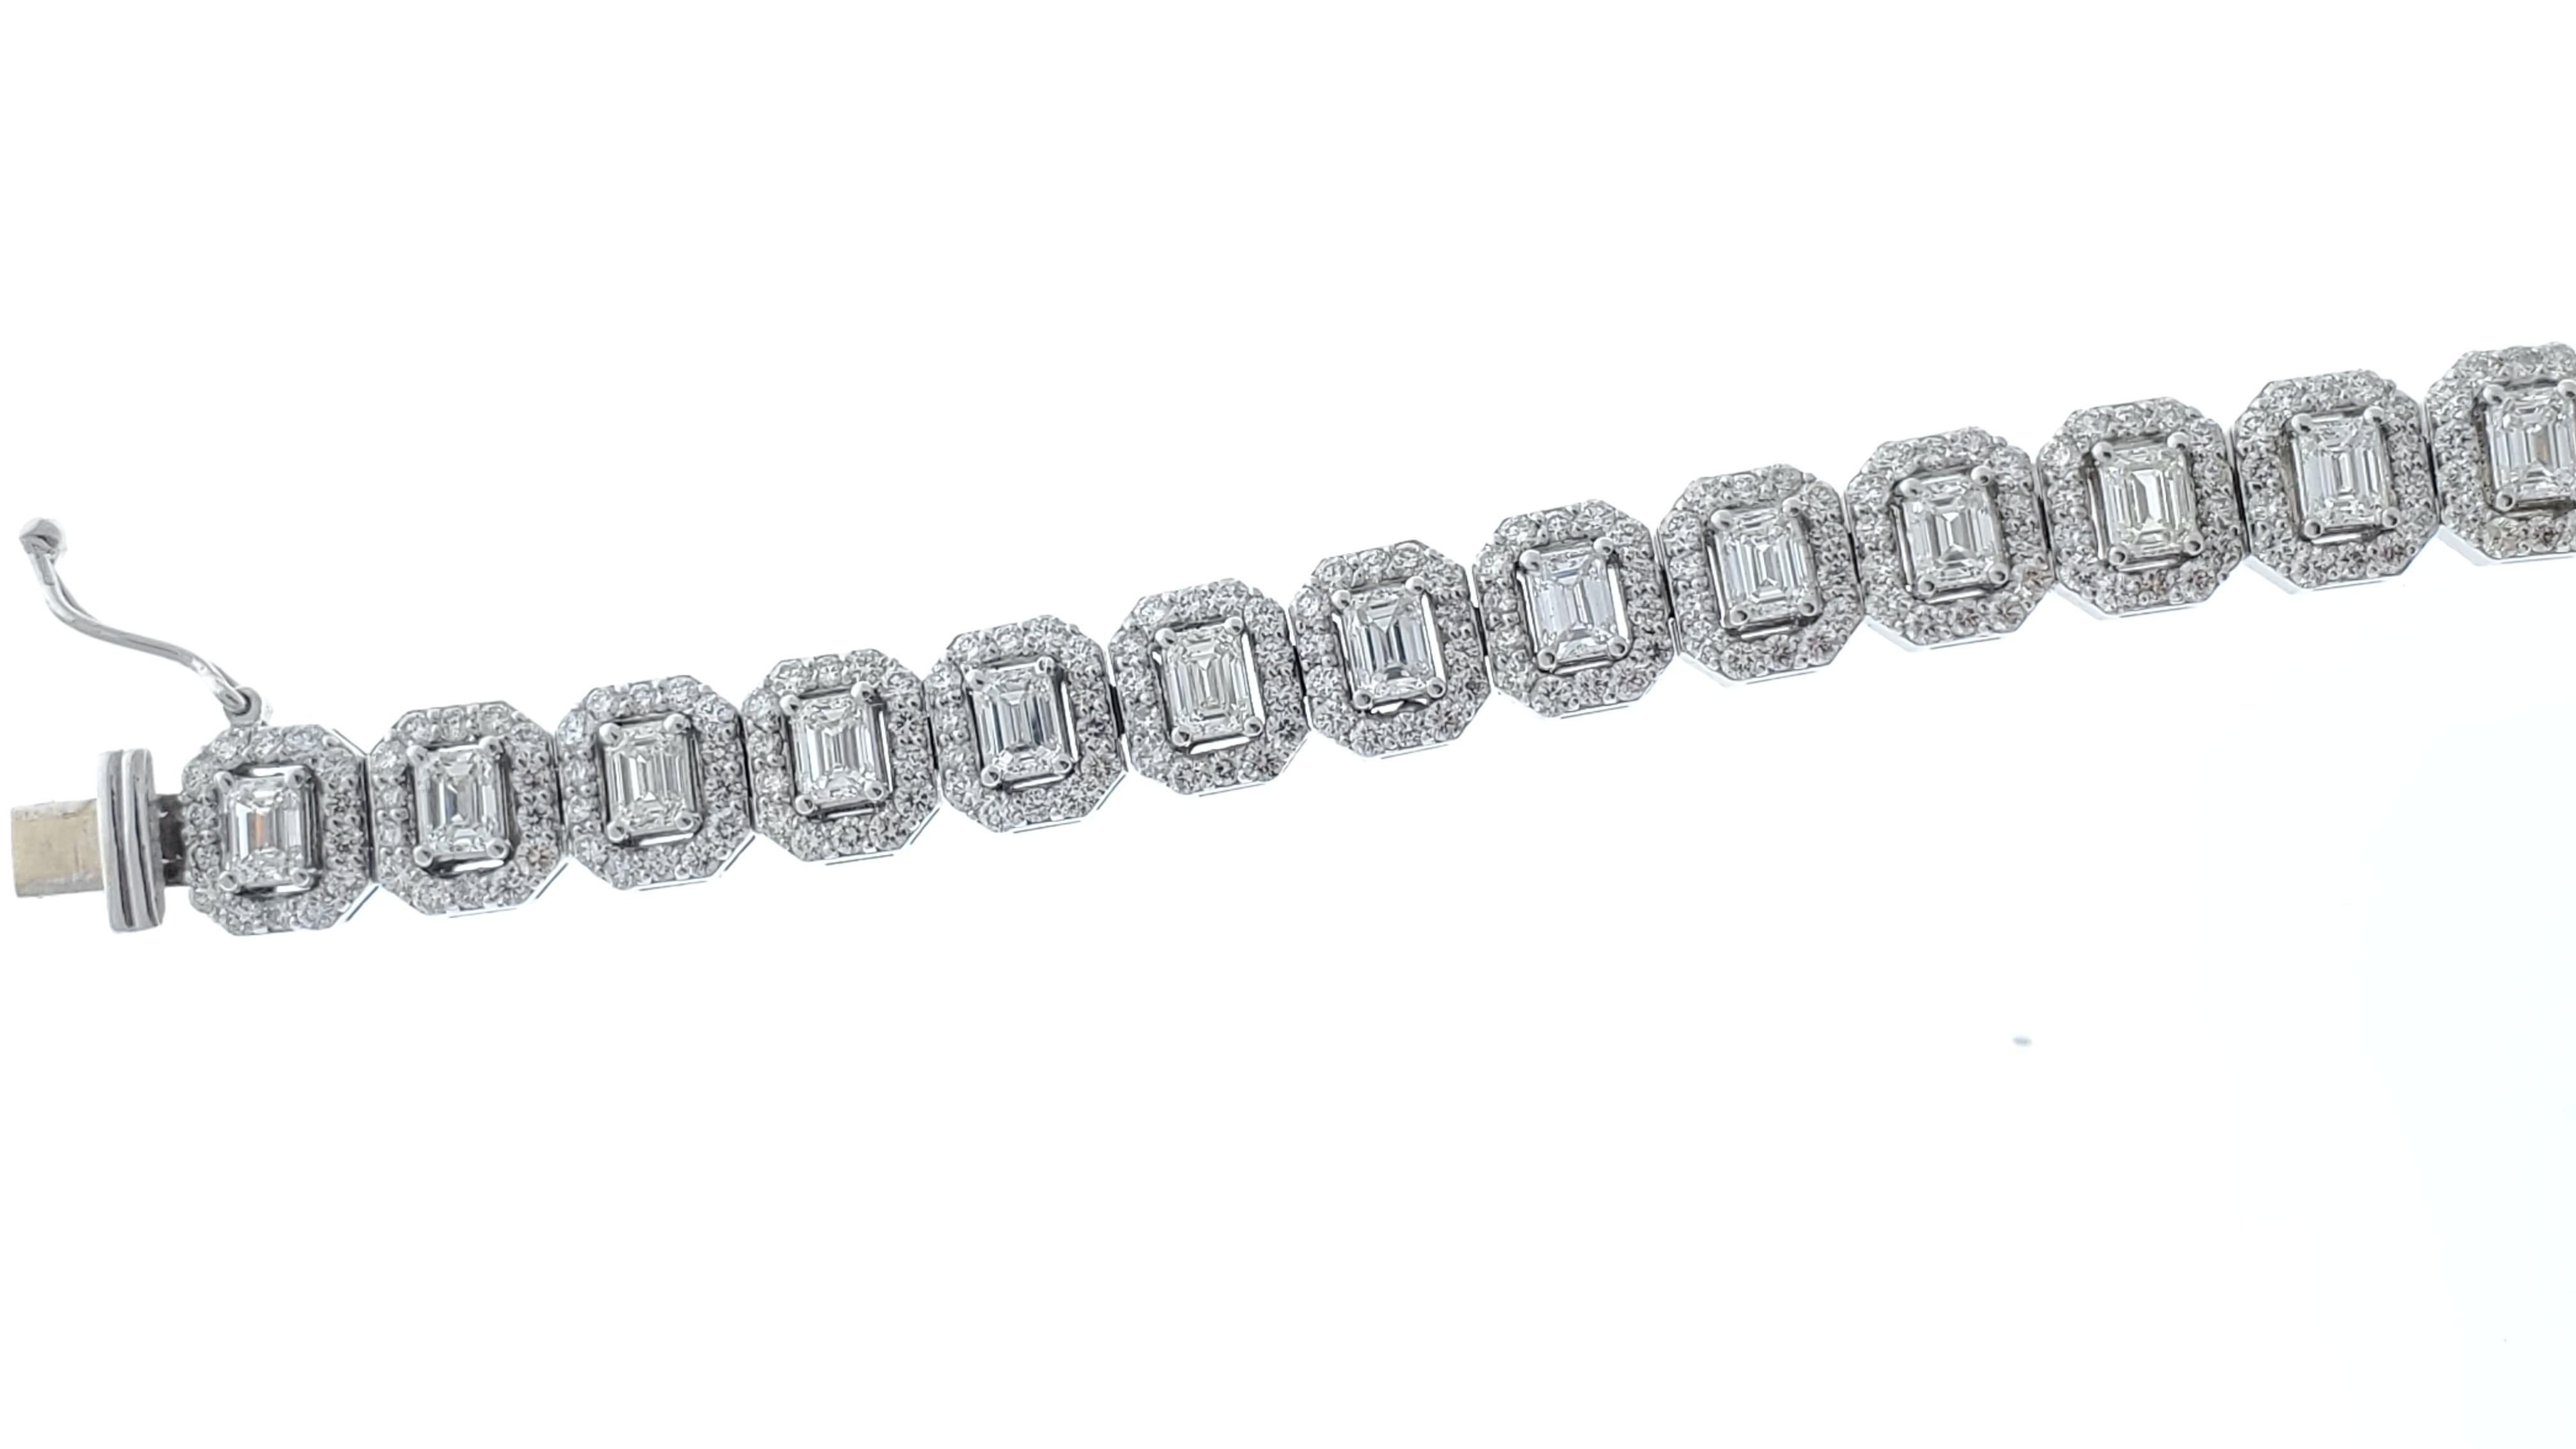 Glamorous and prestigious, this custom made tennis bracelet will leave a long-lasting impression of style that is right on-trend. Designed in brightly polished 14 karat white gold, this gorgeous diamond tennis bracelet features a total of 390